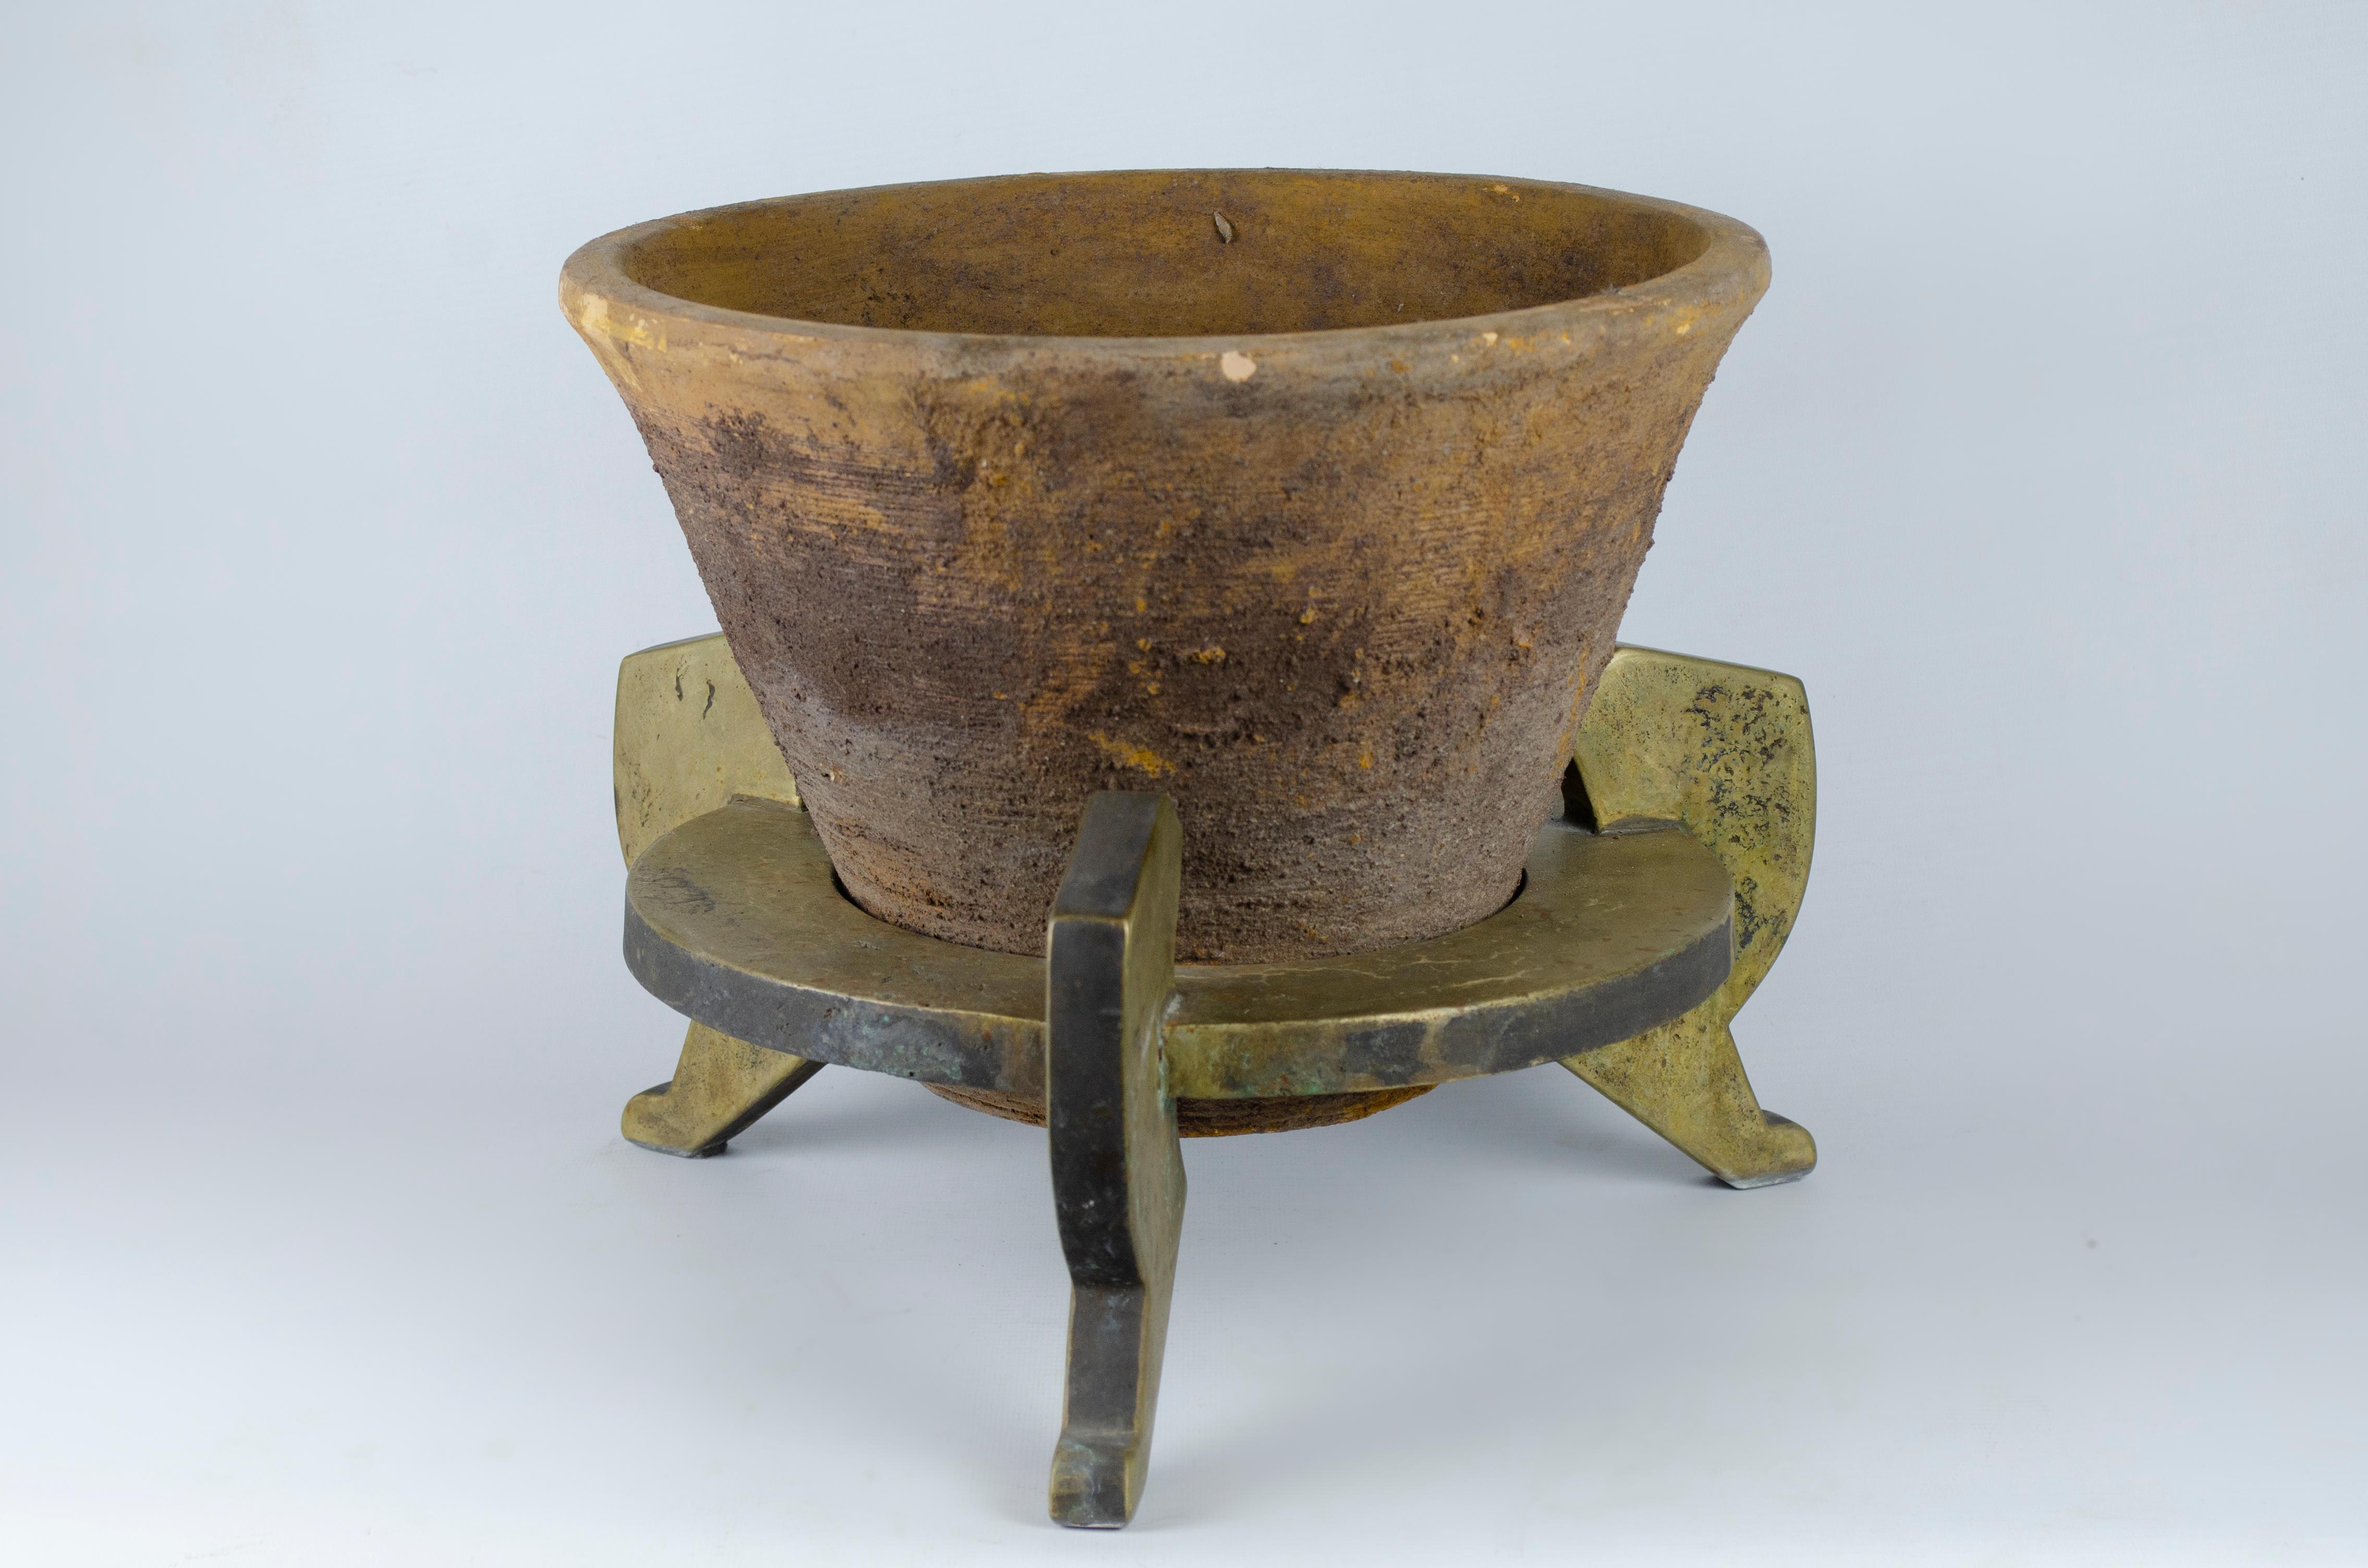 Pair of planters made by Marc Du Plantier (1901 -1974). The design has an Egyptian inspiration, the pots are made of terracotta and the base is bronze with an oxidized patina.

They were reproduced in the ALB Antiquities Gallery in